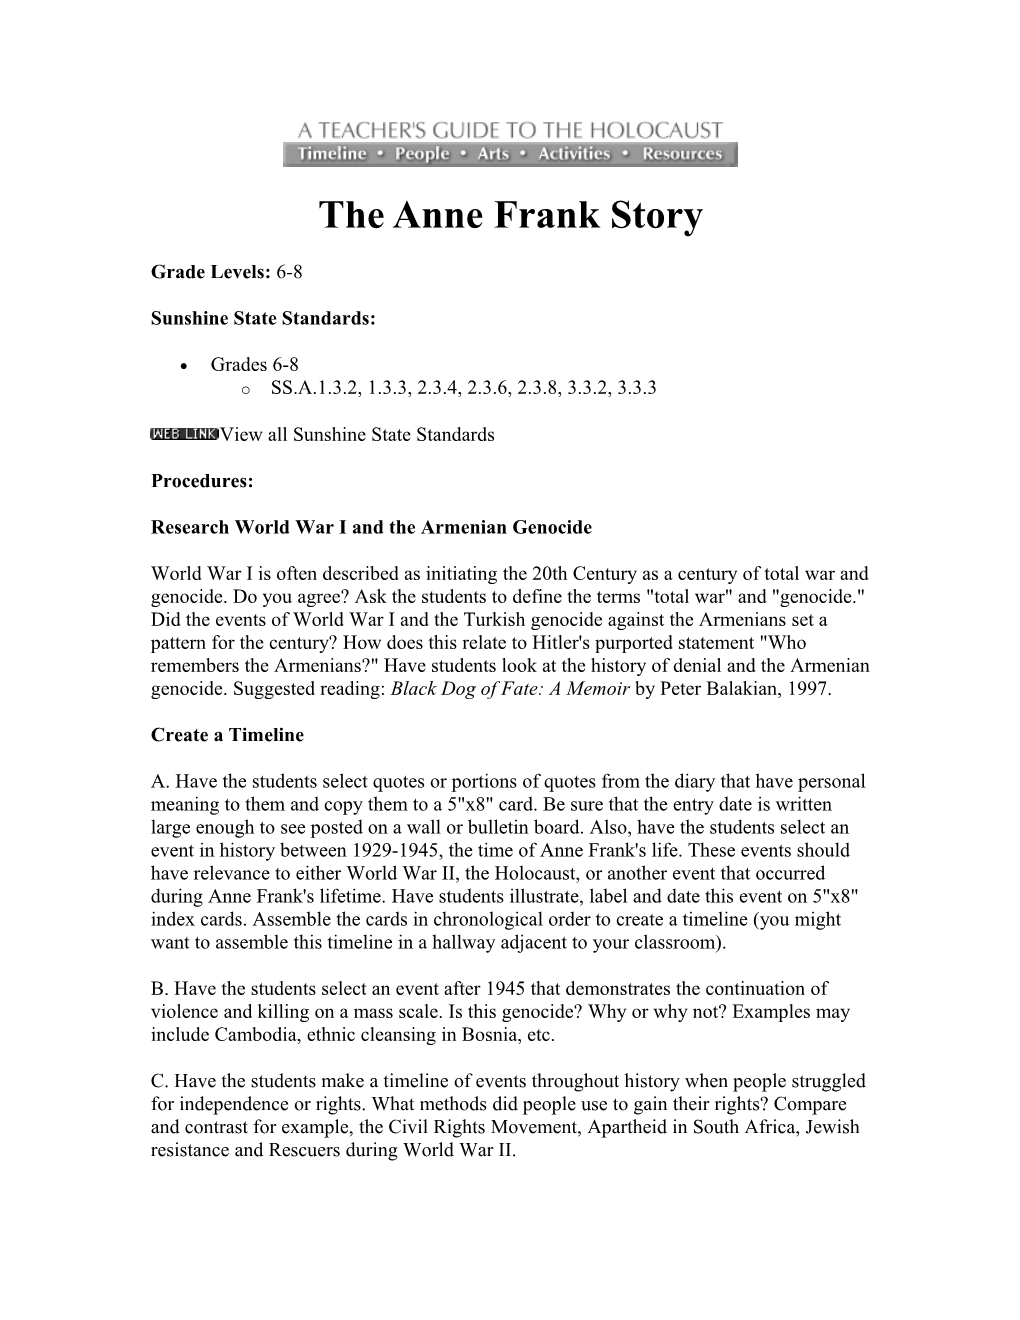 The Anne Frank Story